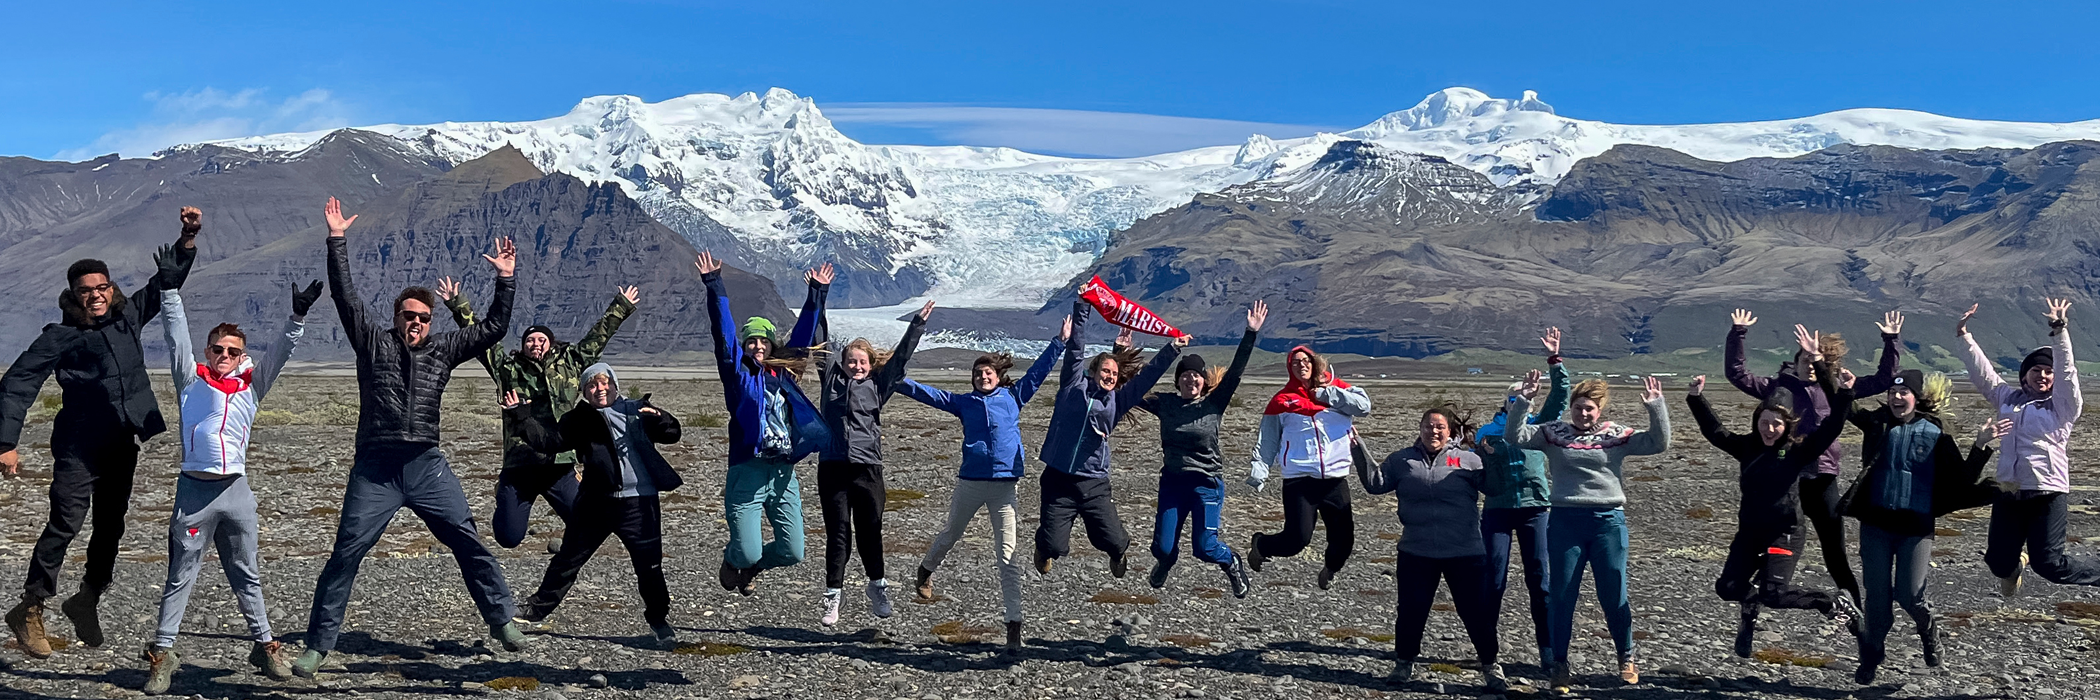 Image of students studying in Iceland.